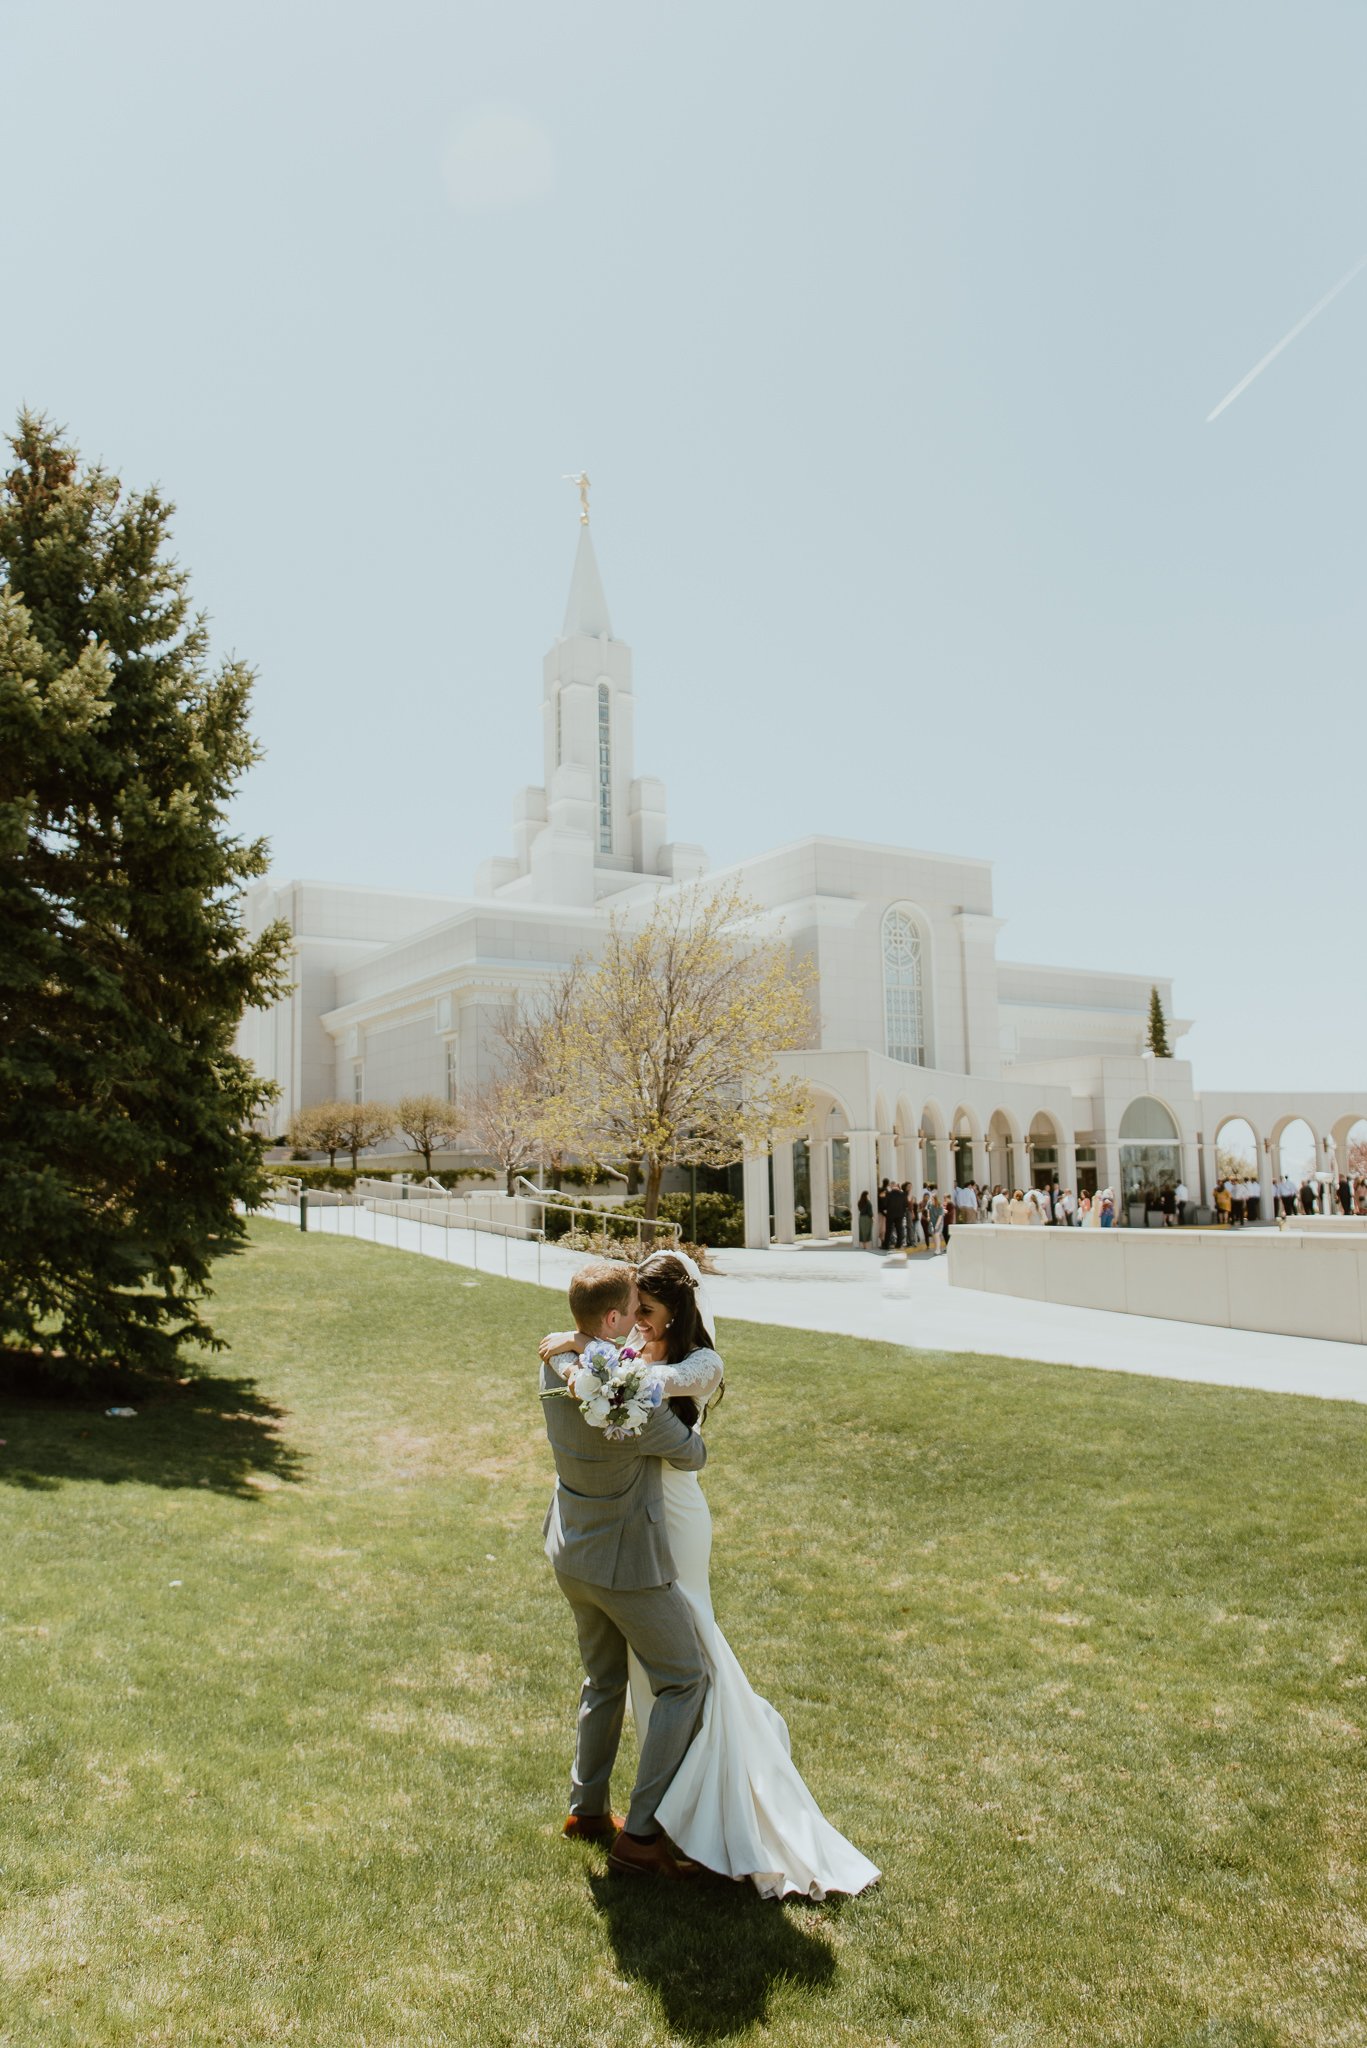 Utah-State-Capitol-Spring-Blossons-Bountiful-LDS-Wedding-Hopesandcheers-photo-53